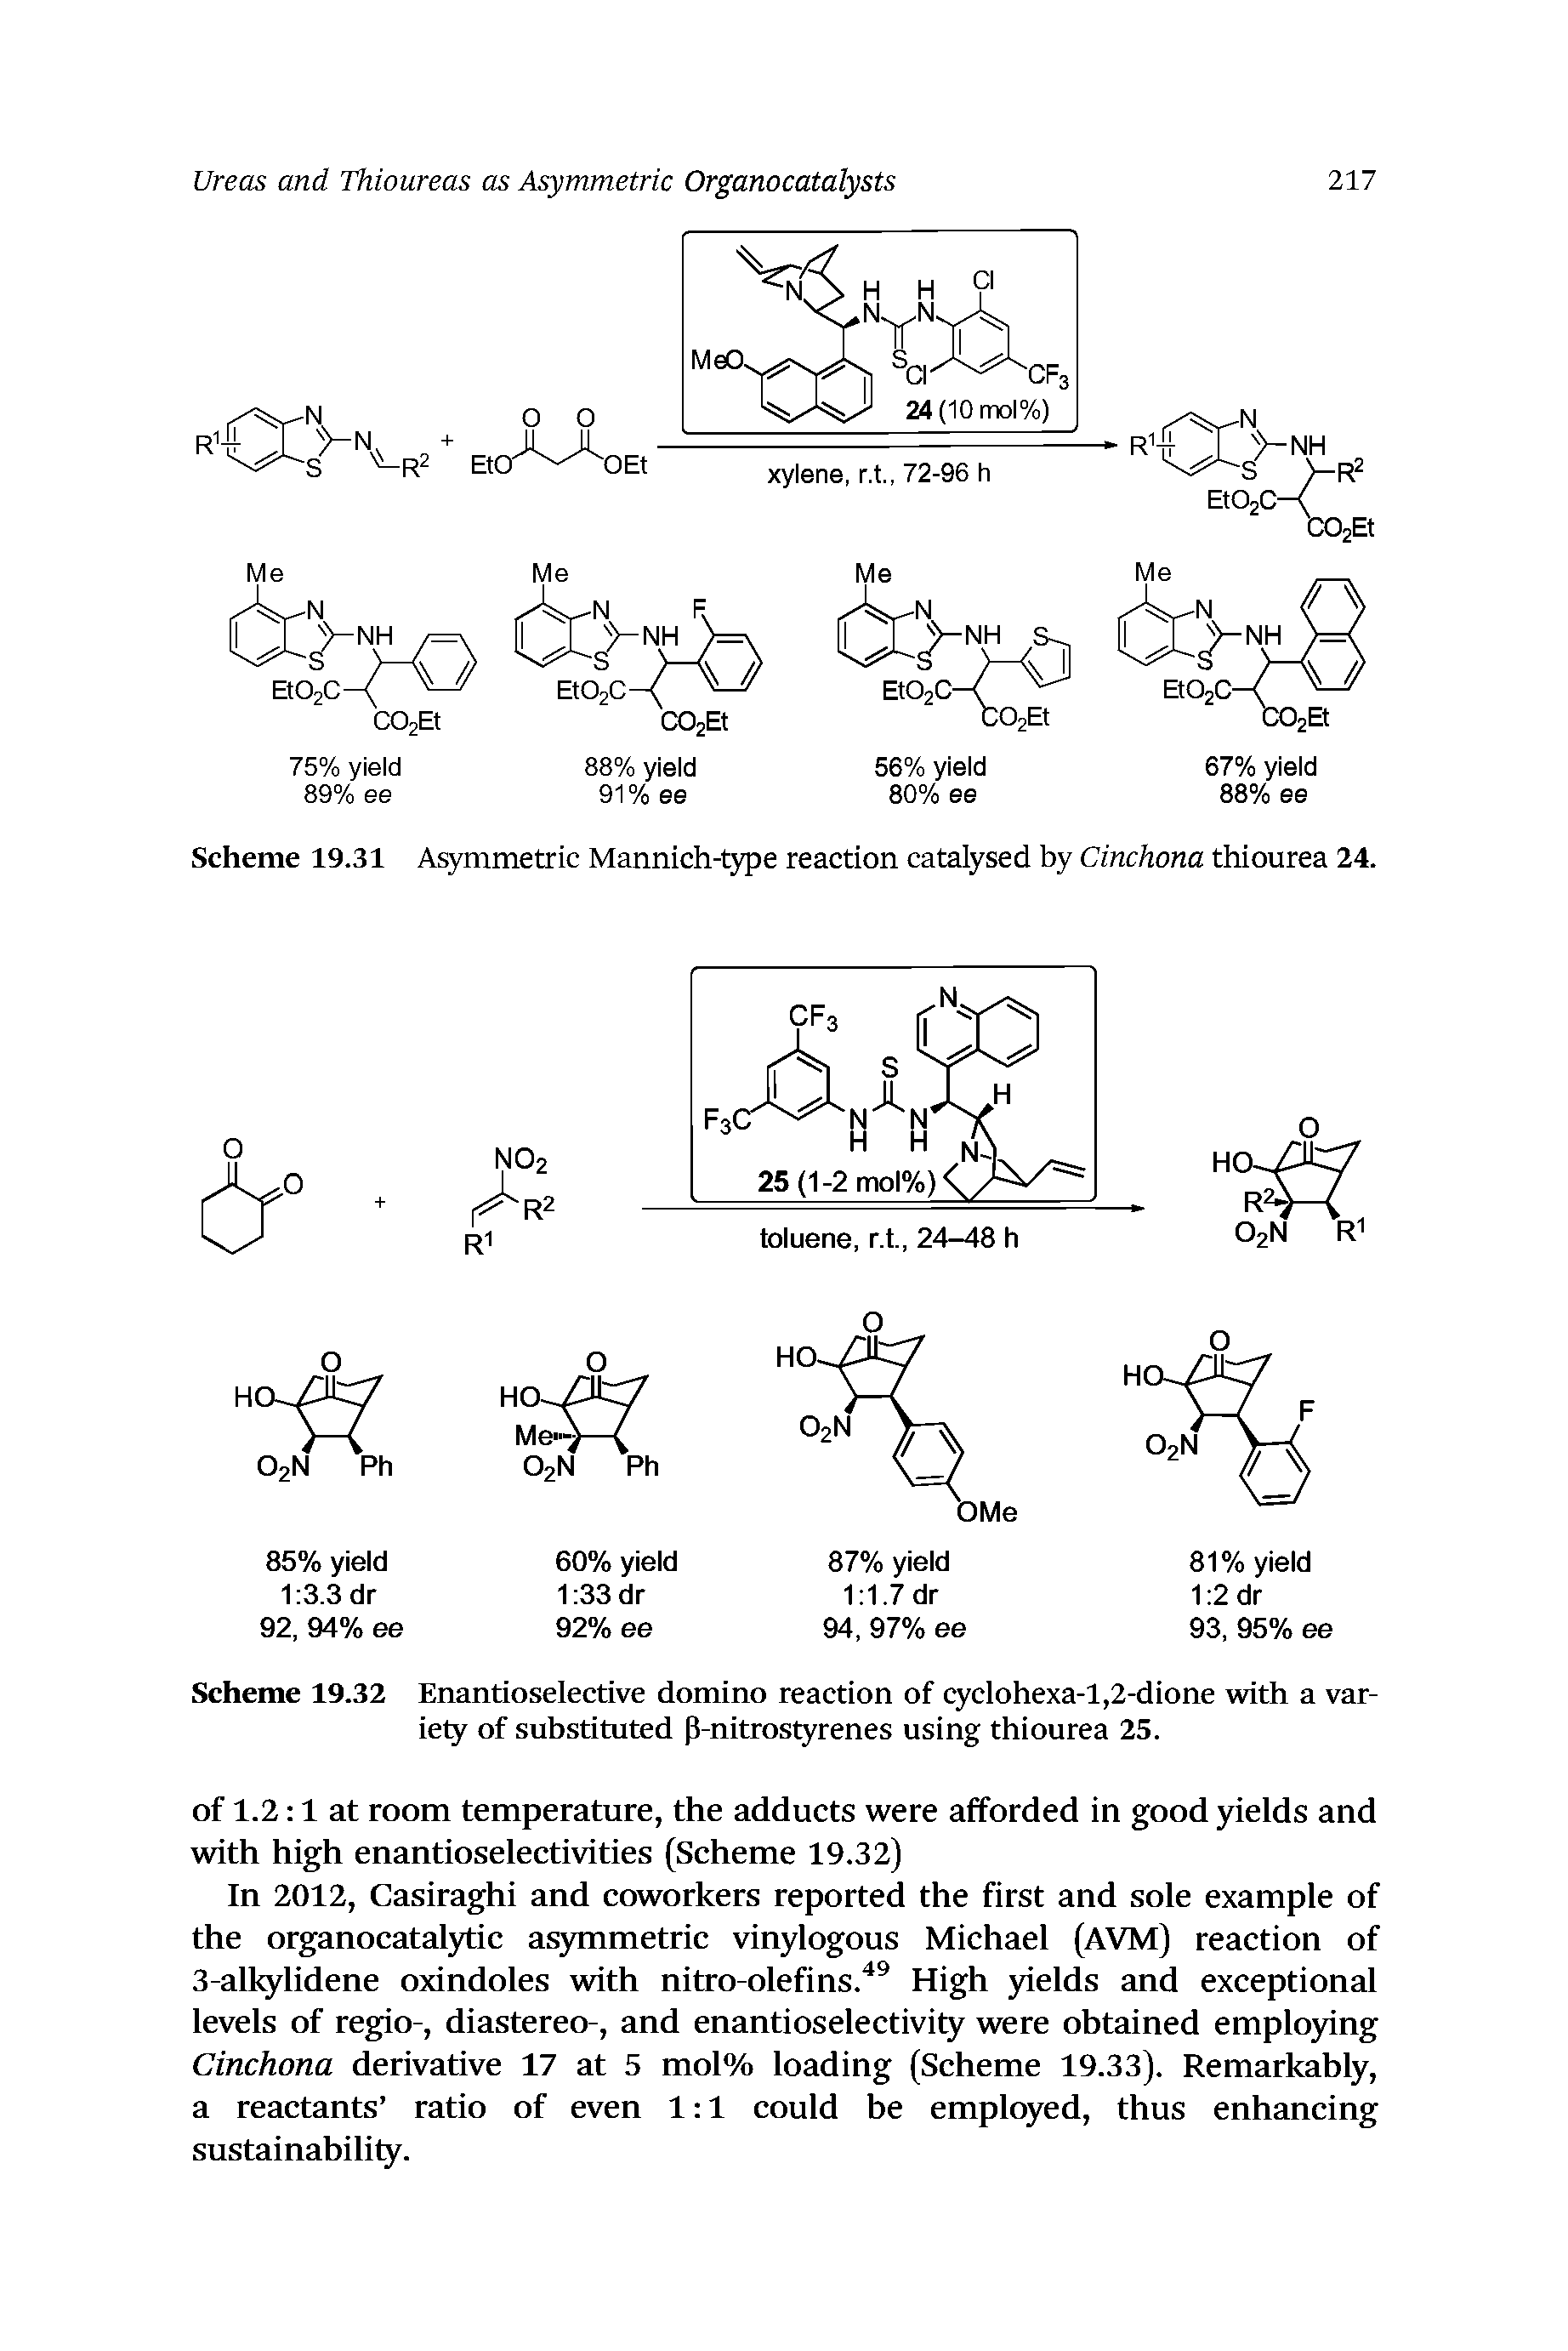 Scheme 19.32 Enantioselective domino reaction of (yclohexa-l,2-dione with a variety of substituted p-nitrostyrenes using thiourea 25.